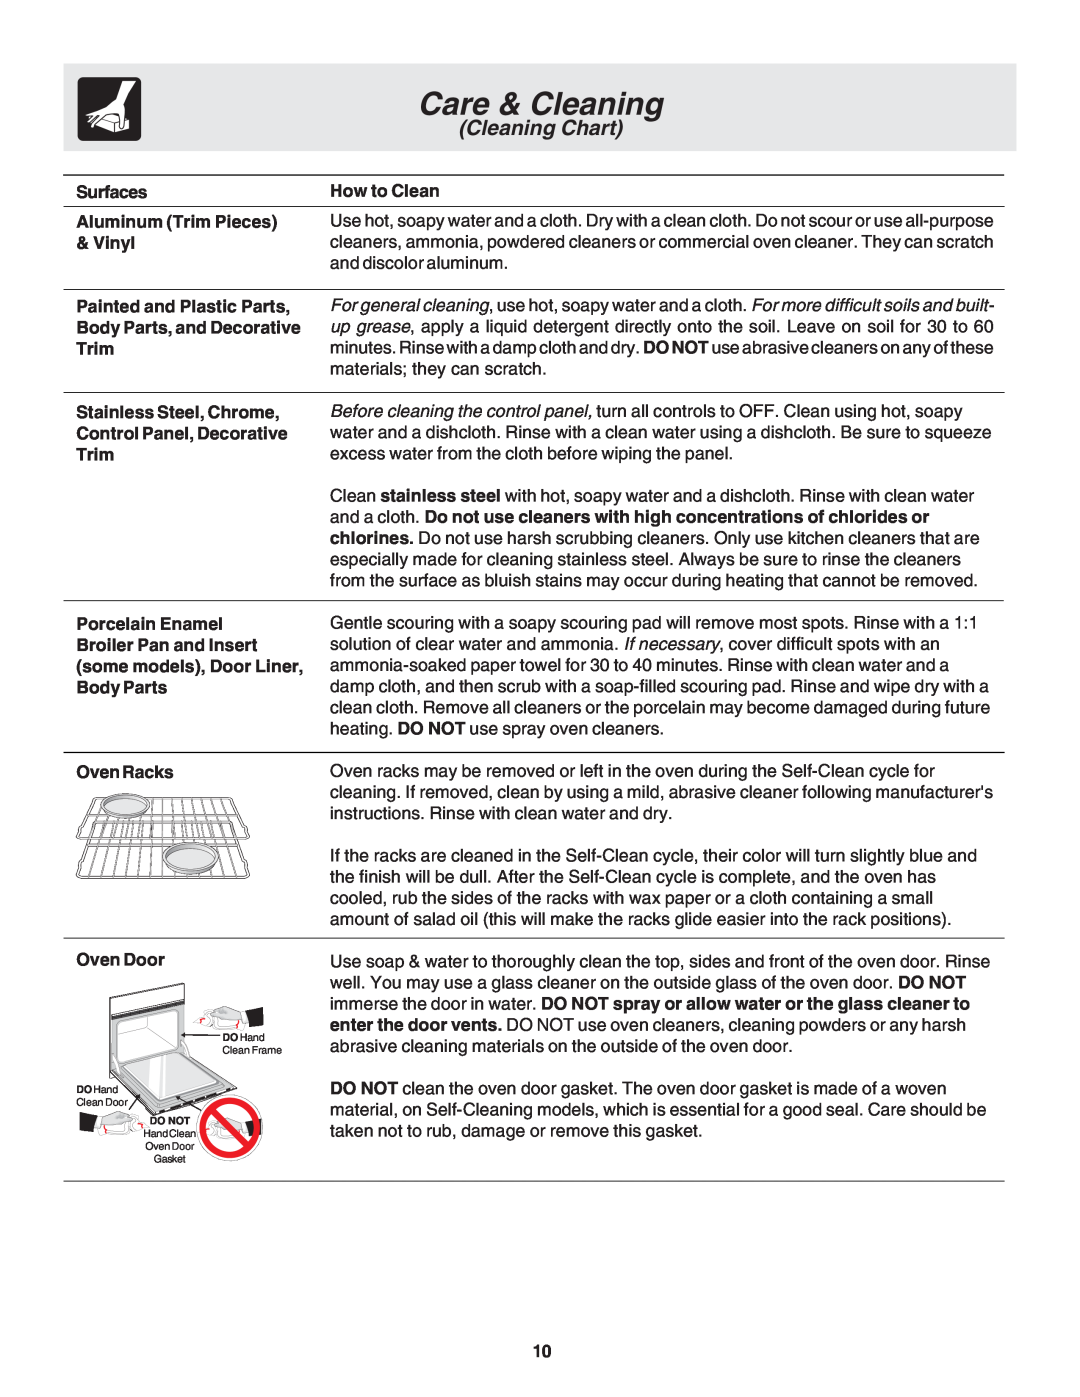 Frigidaire 318205115 warranty Care & Cleaning, Surfaces, How to Clean, Aluminum Trim Pieces, Vinyl, and discolor aluminum 